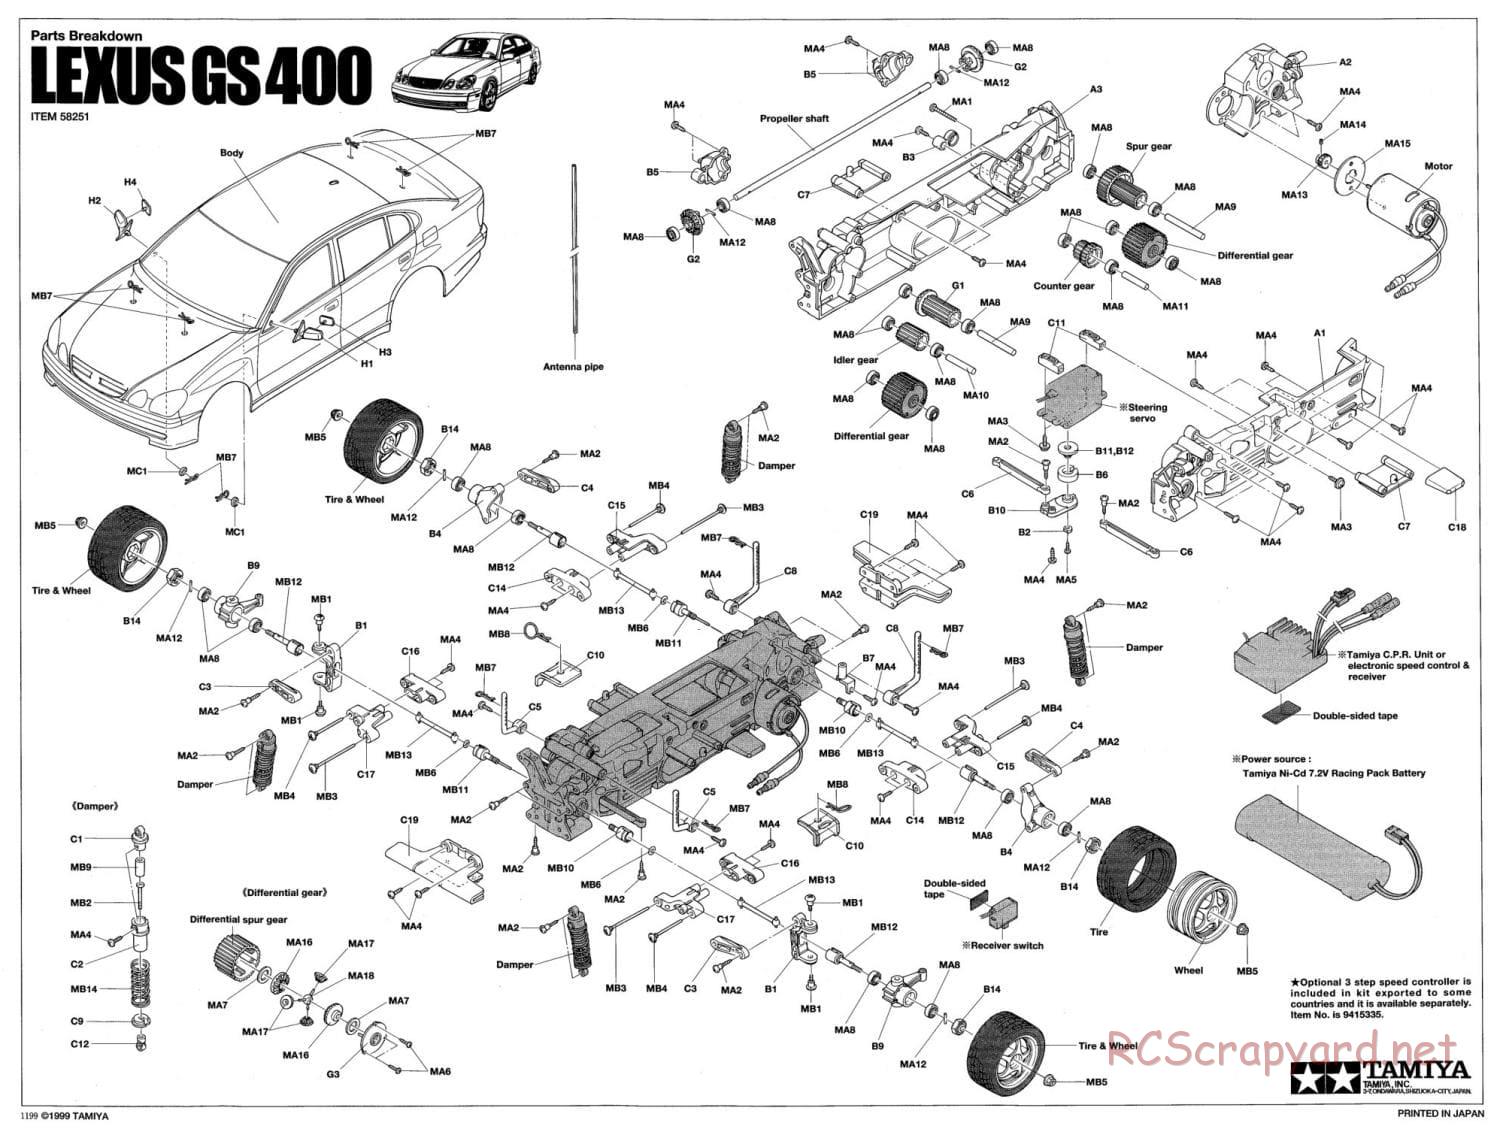 Tamiya - Lexus GS 400 - TL-01 Chassis - Exploded View